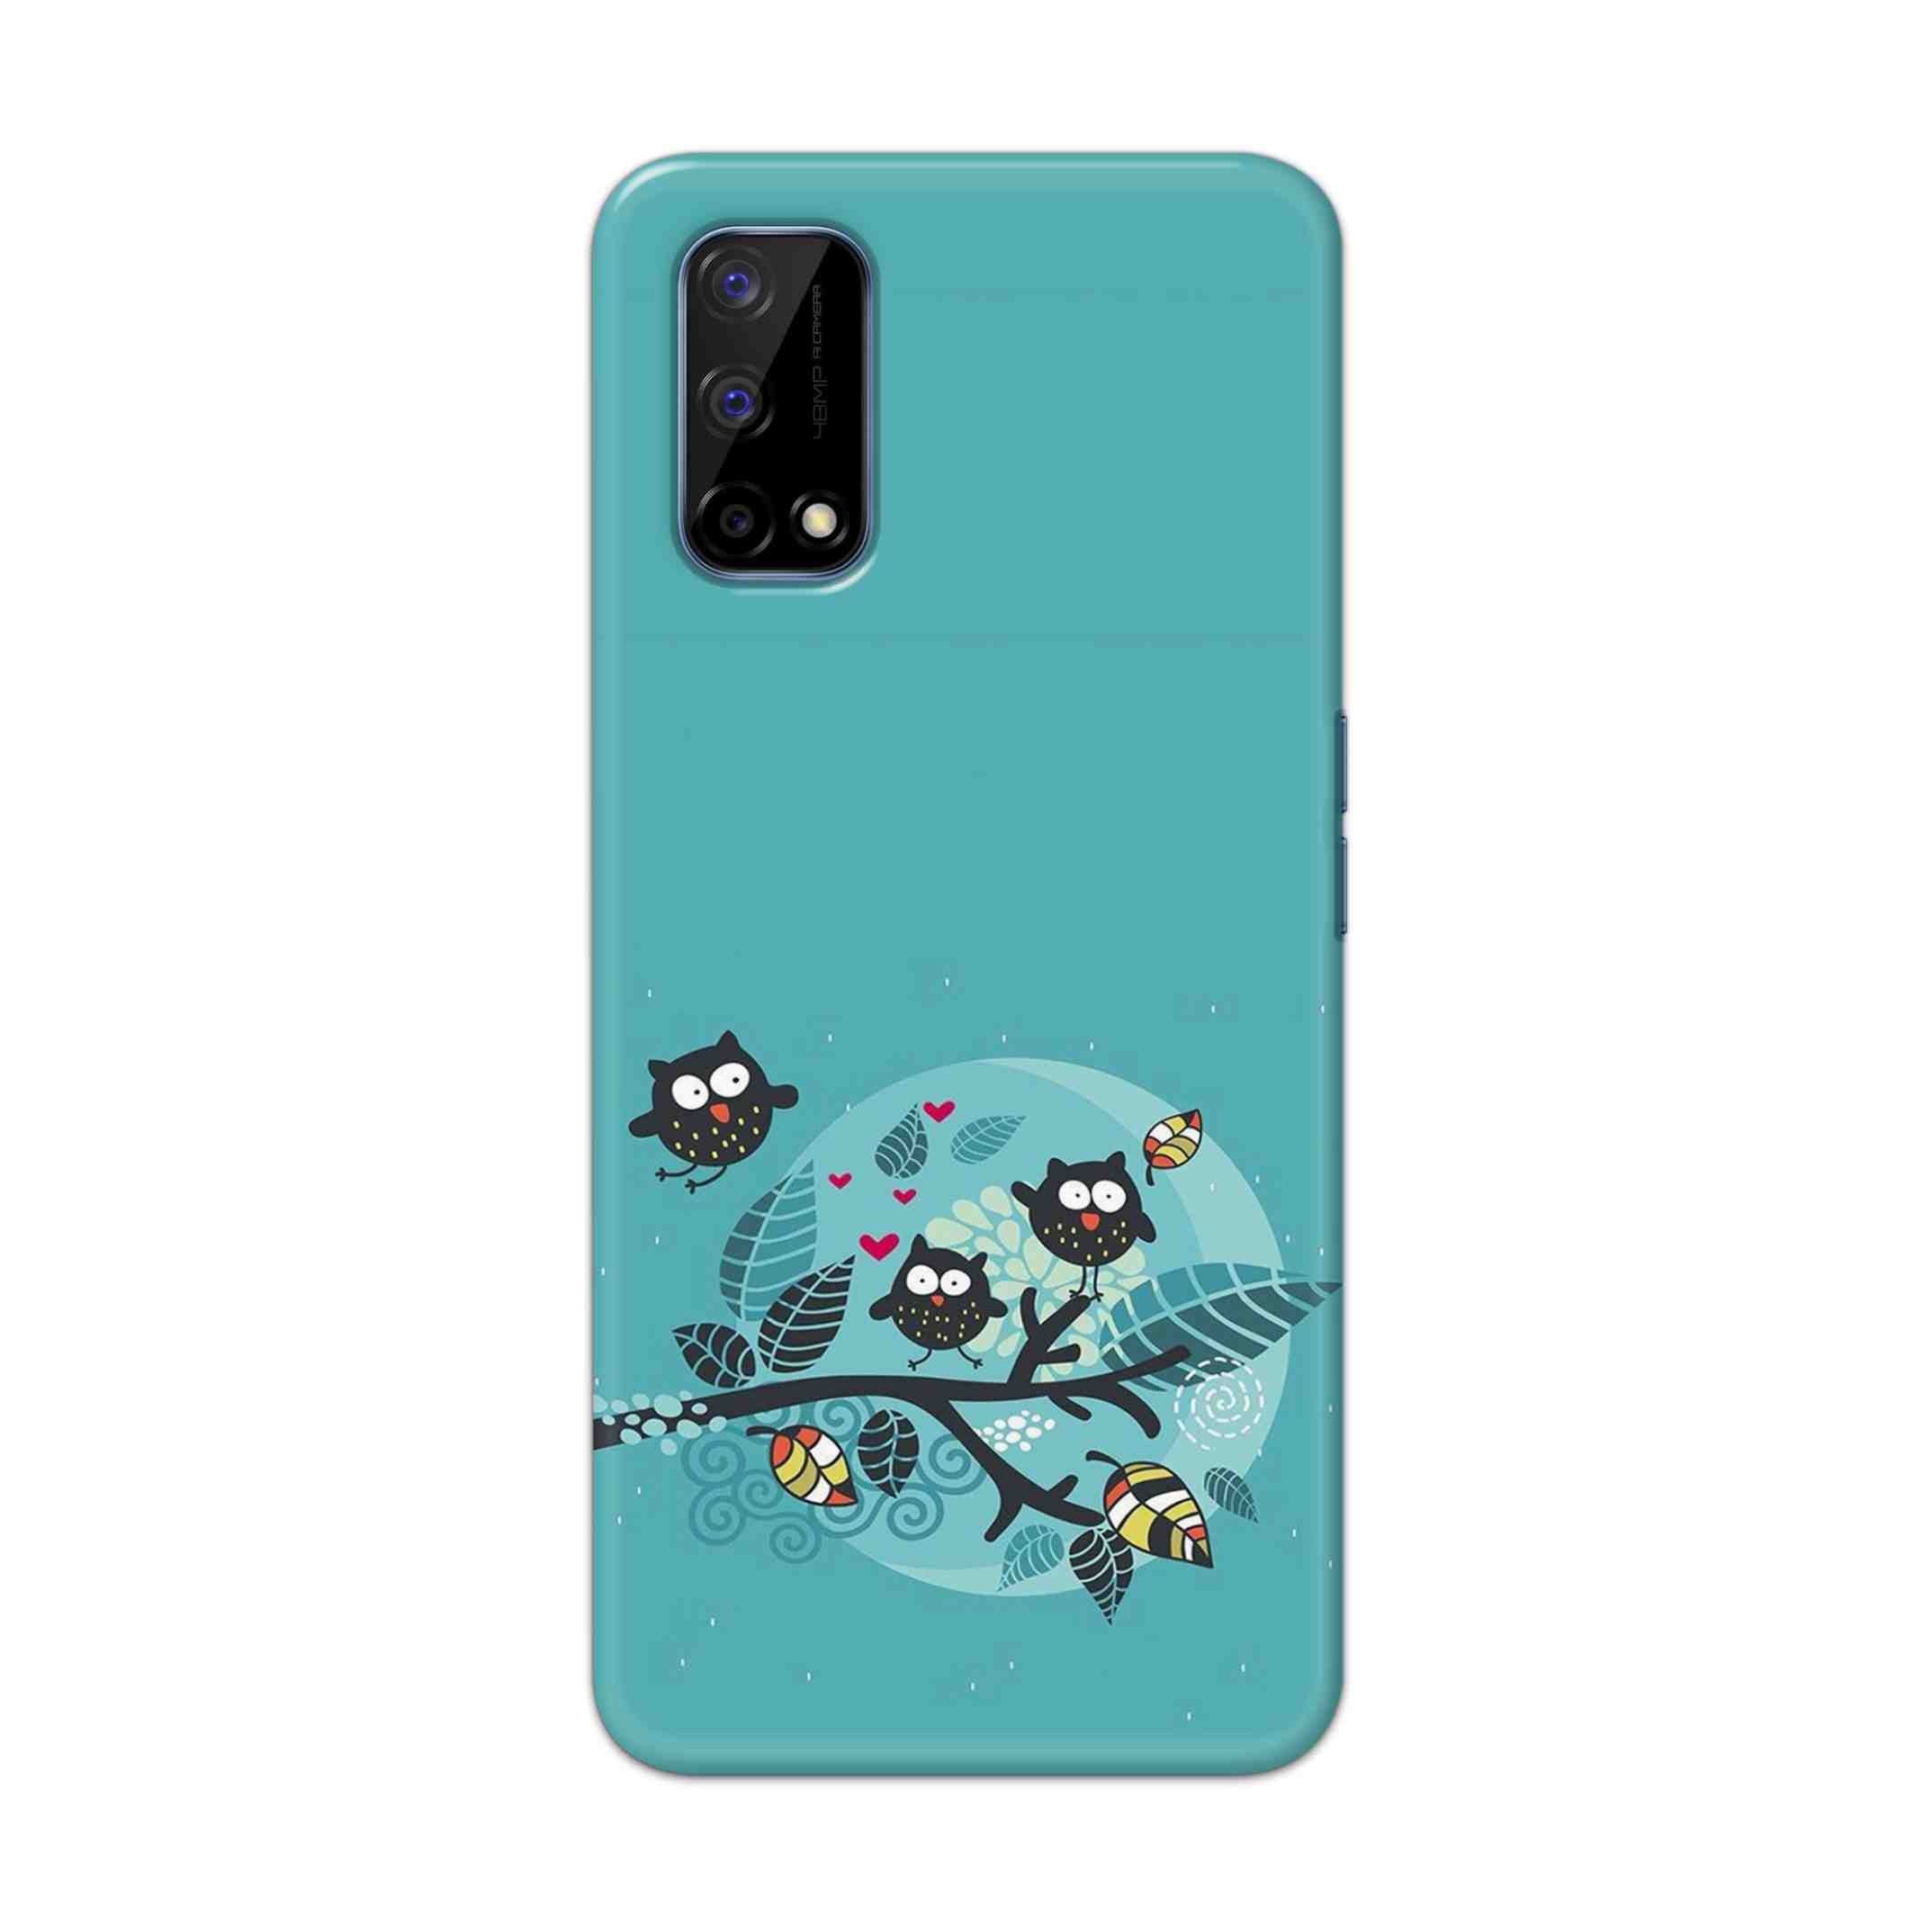 Buy Owl Hard Back Mobile Phone Case Cover For Realme Narzo 30 Pro Online